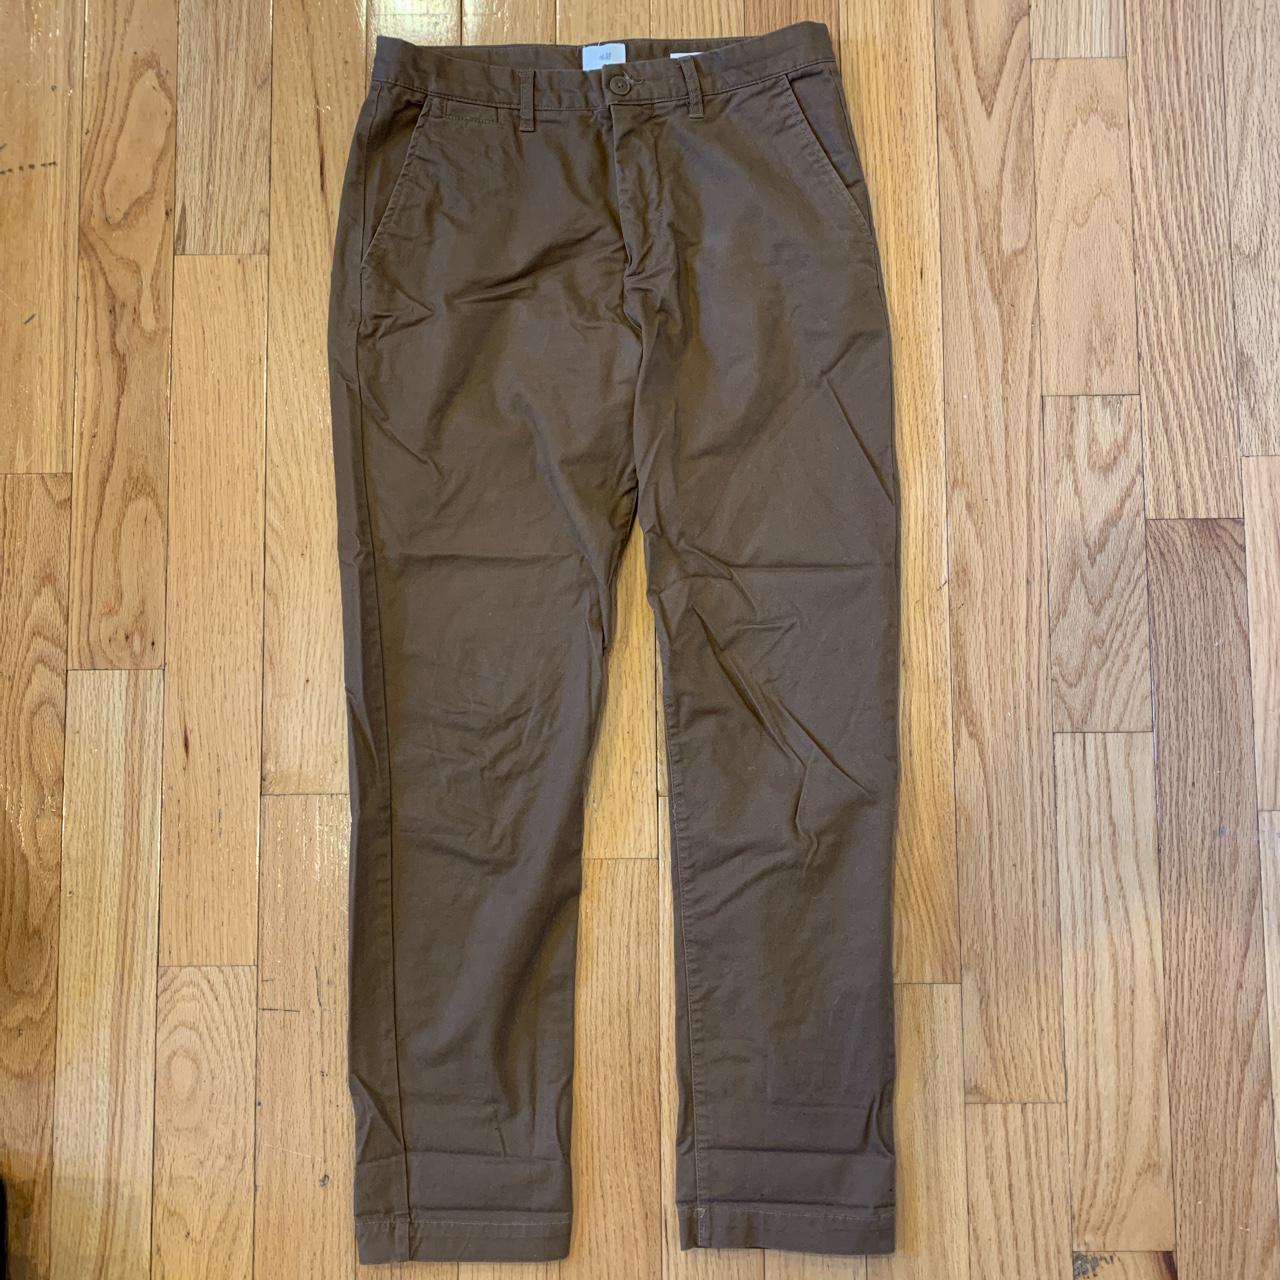 H&M Slim Fit Stretch Chino Pants Size 30 Hmu for... - Depop